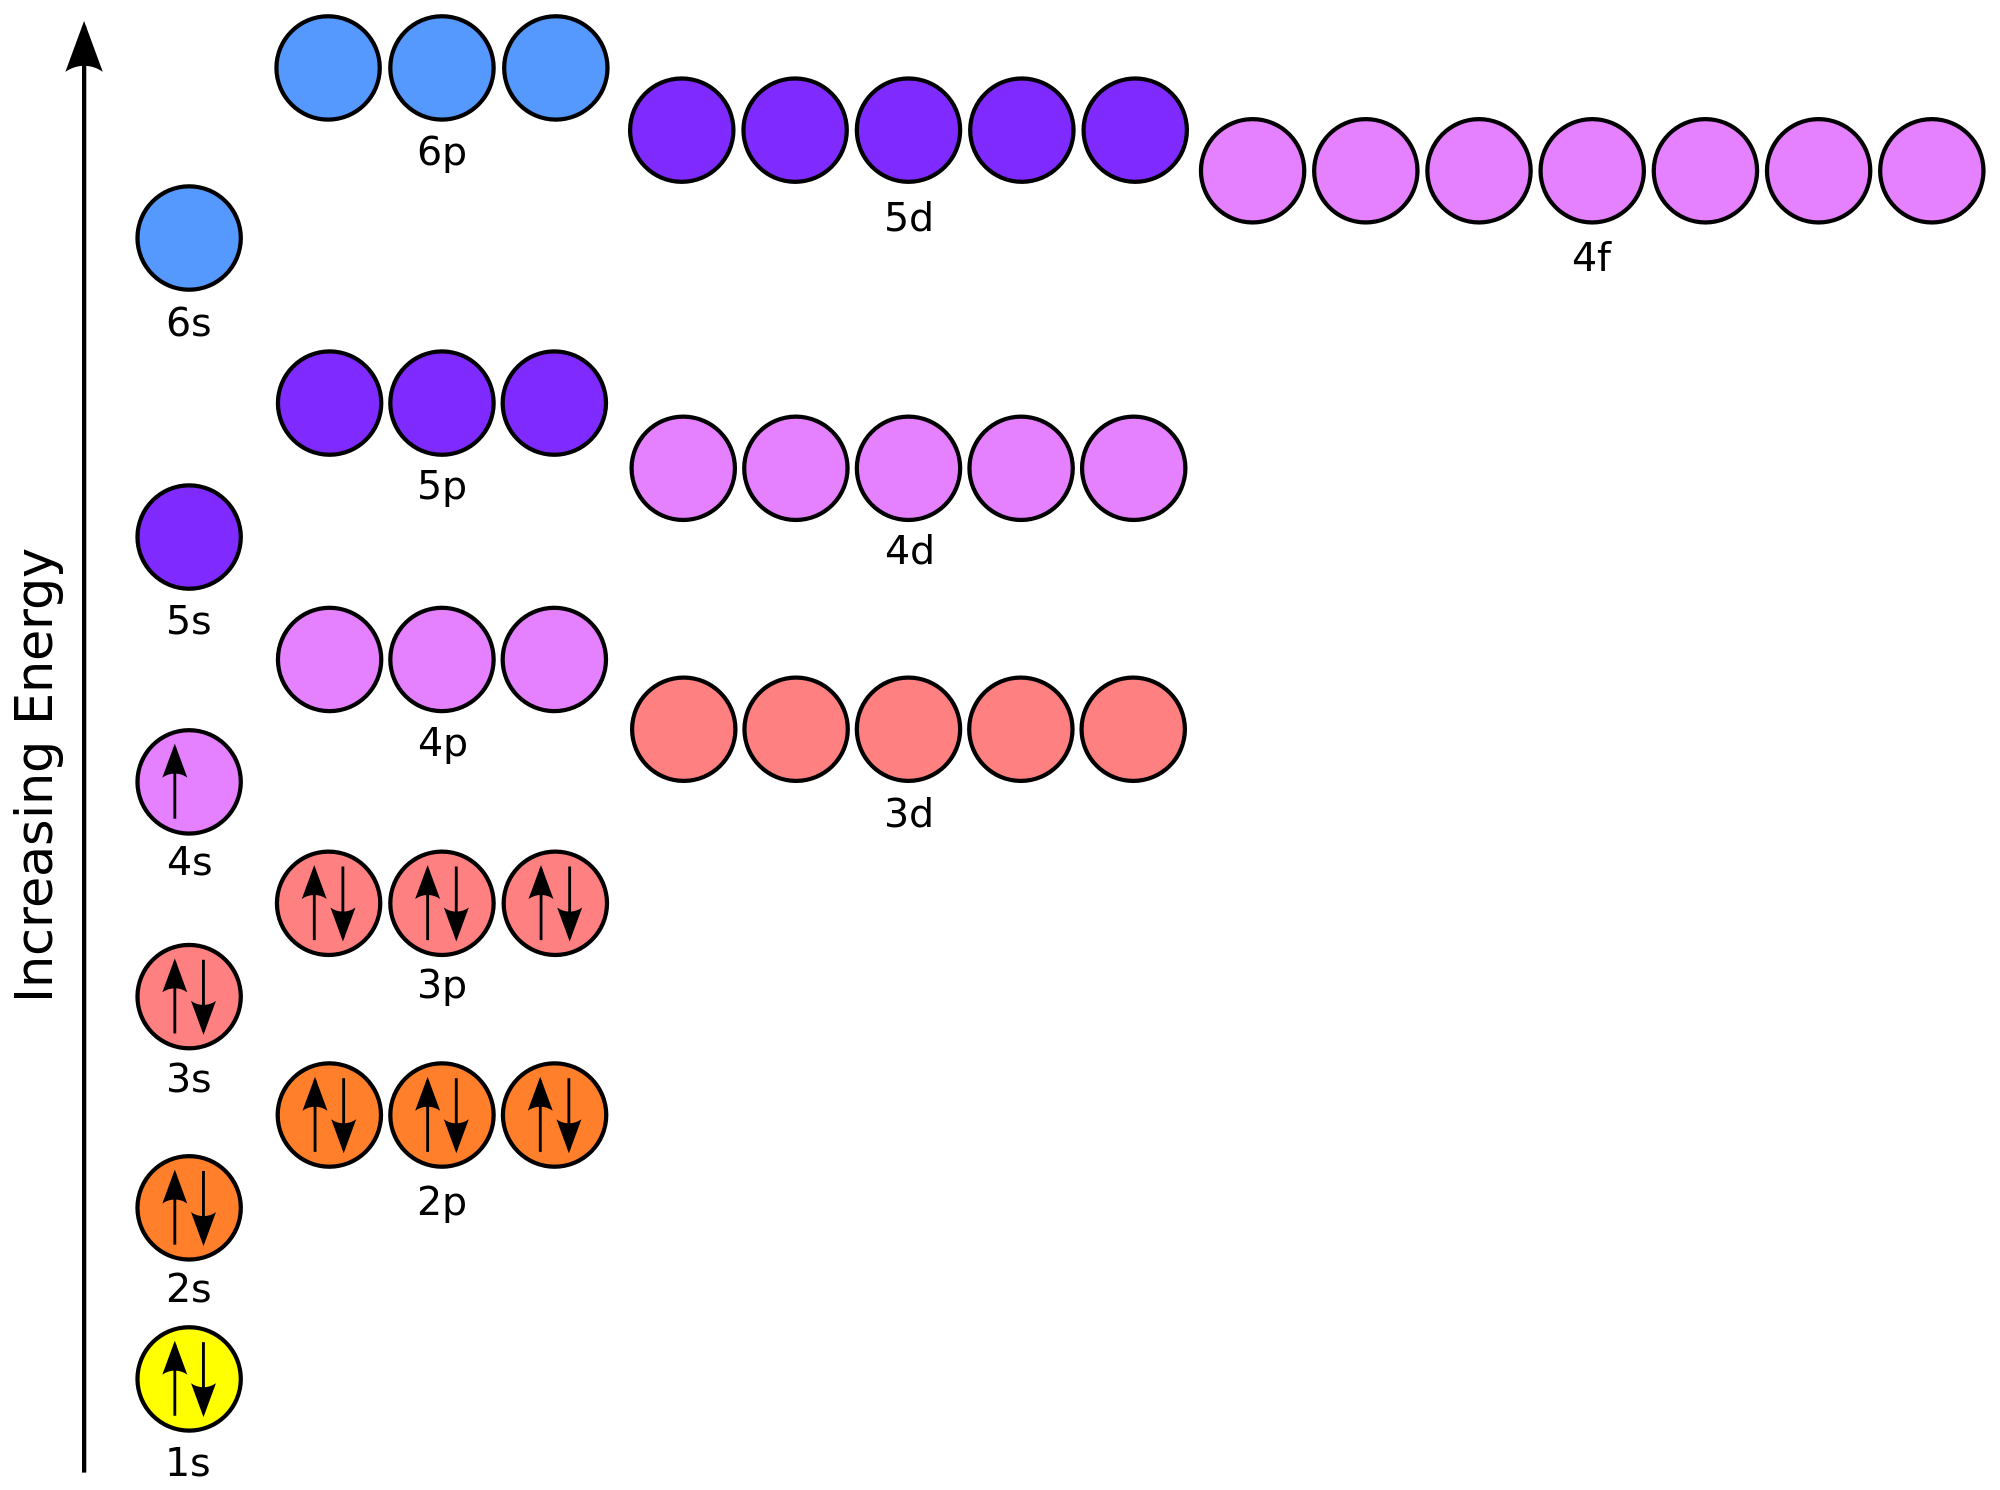 http://en.wikibooks.org/wiki/High_School_Chemistry/Electron_Configurations